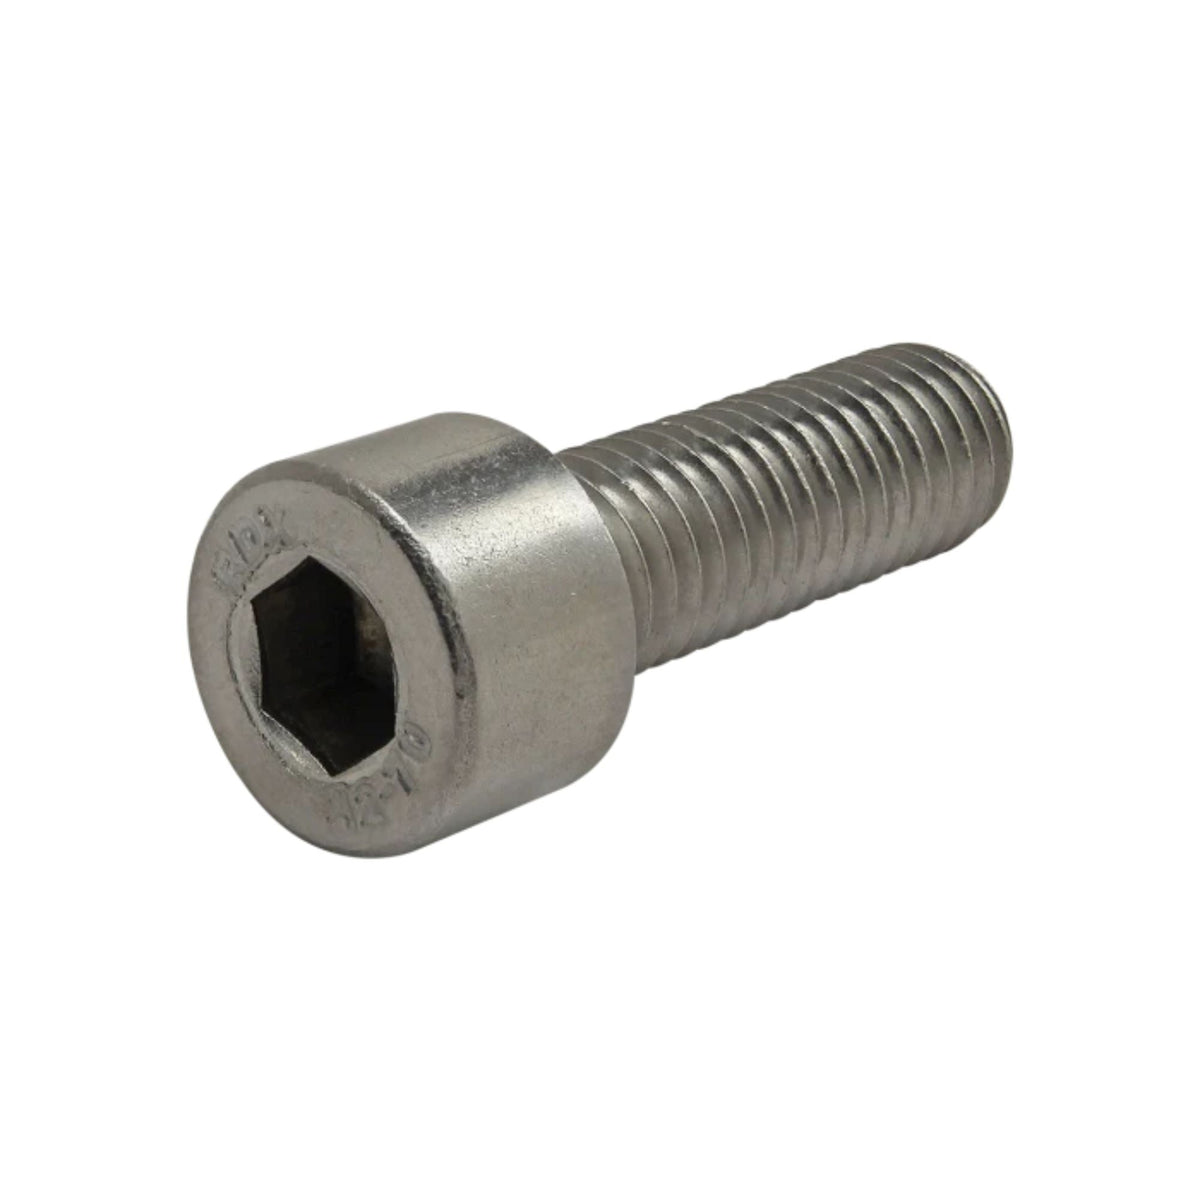 side view of a socket head cap screw with a hex head on the left side and threading on the right